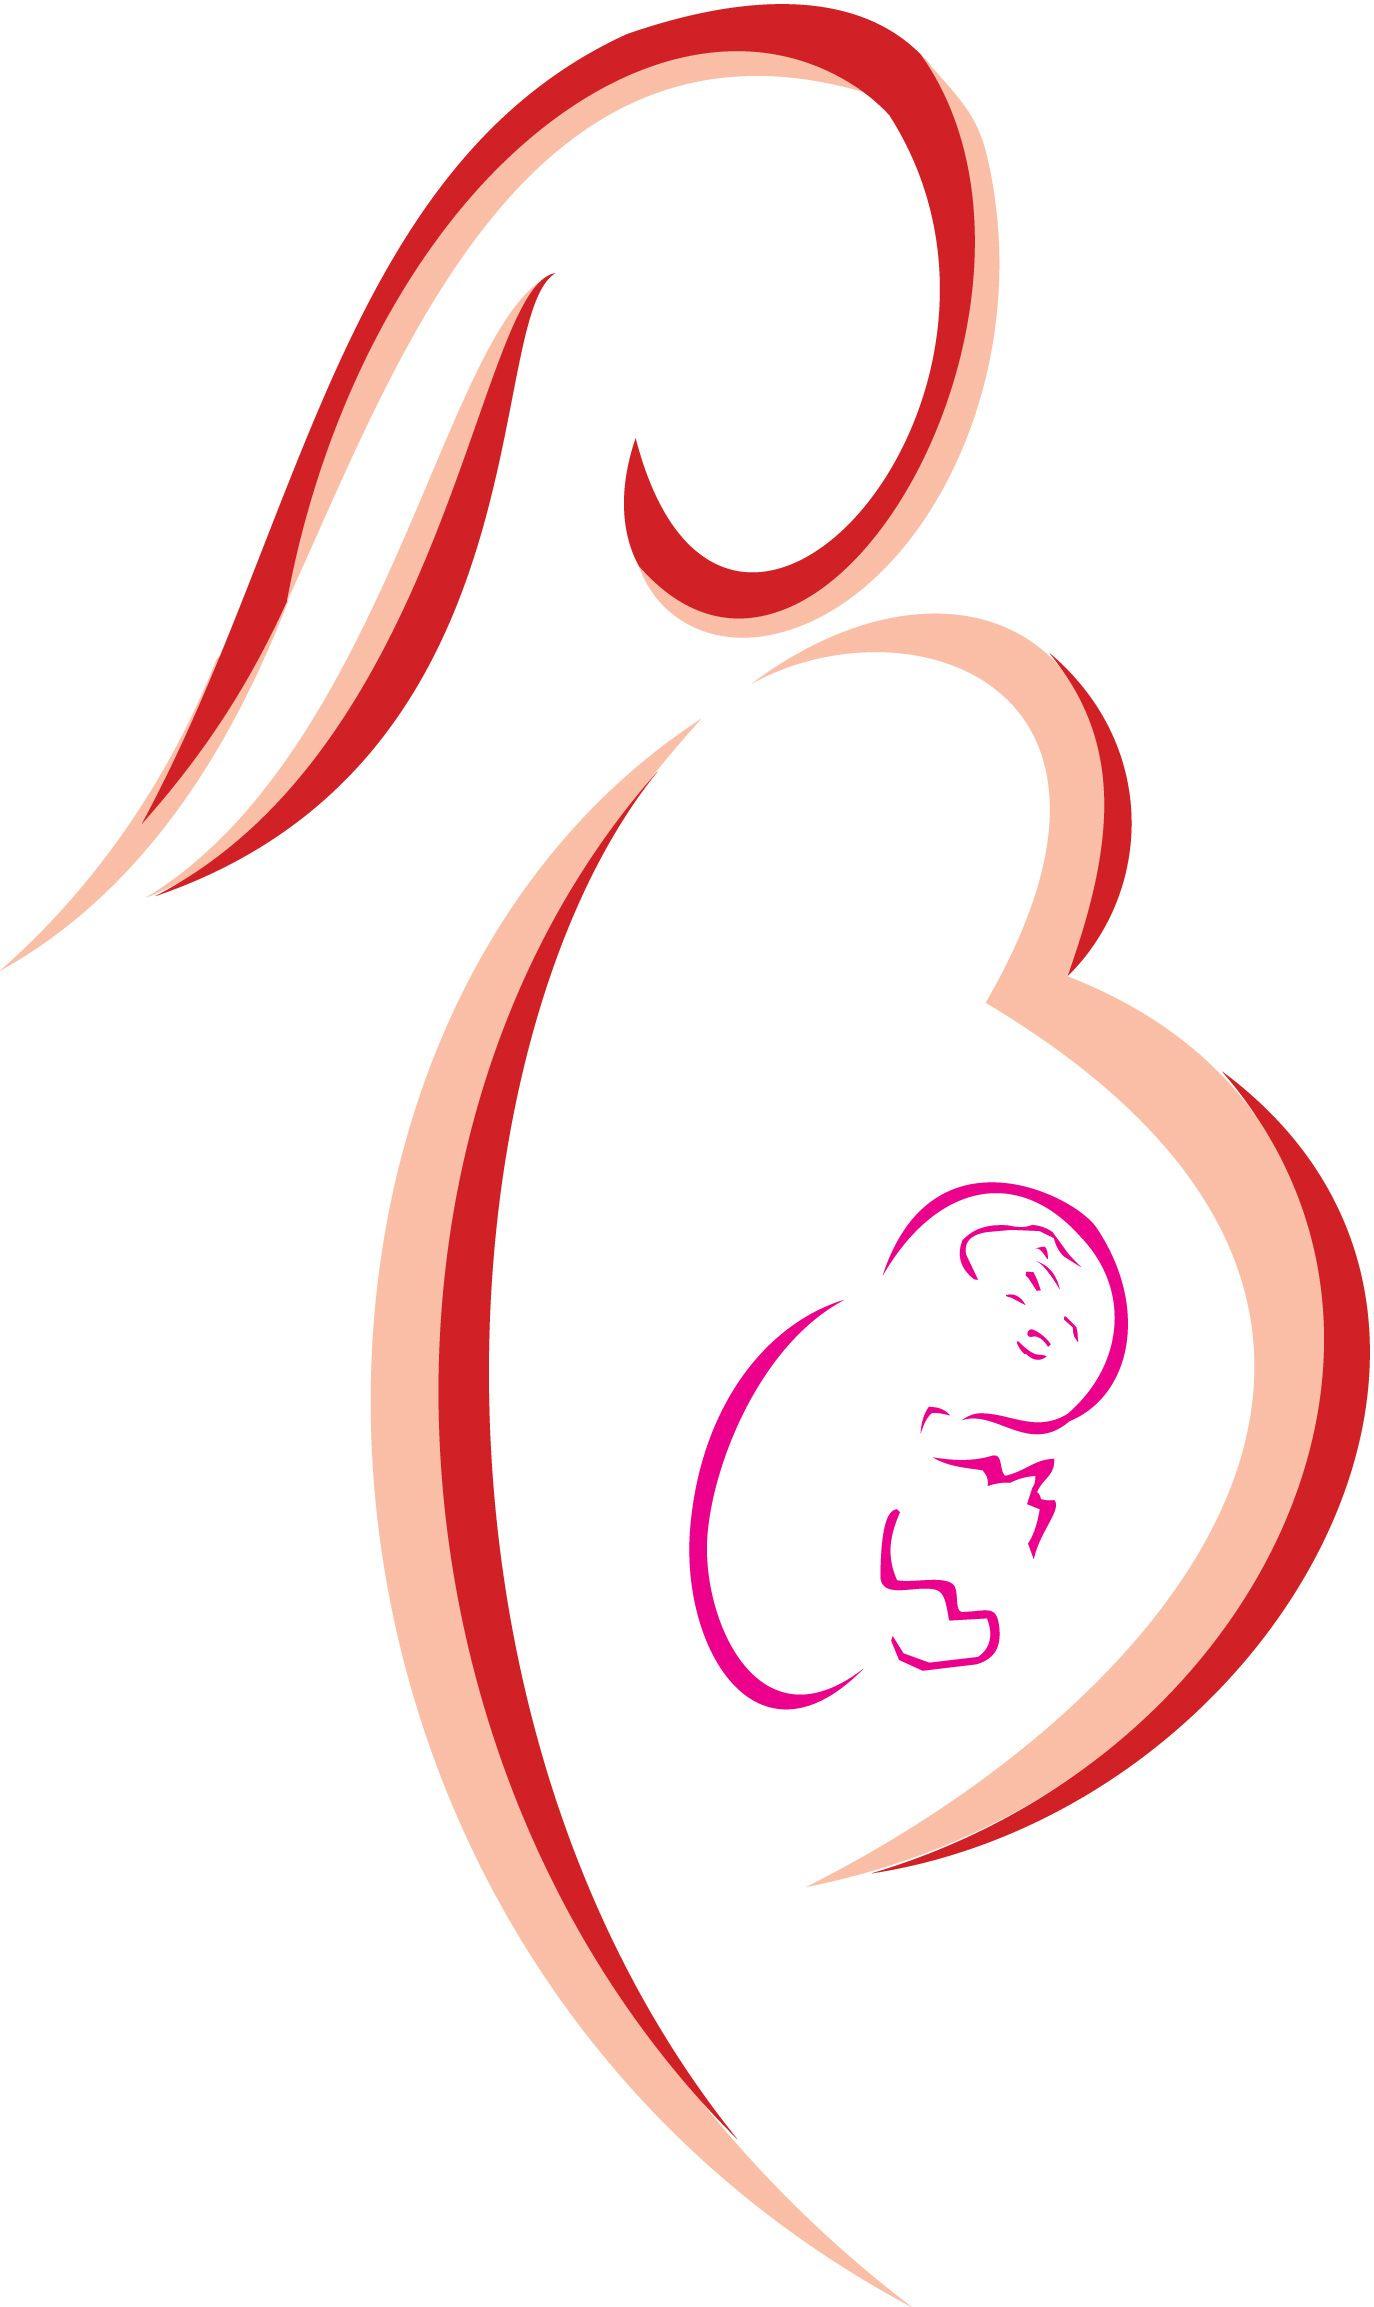 Gynecology Logo - Dr. Neera Seth's Clinic, Gynecology Clinic in Meerut City, Meerut ...